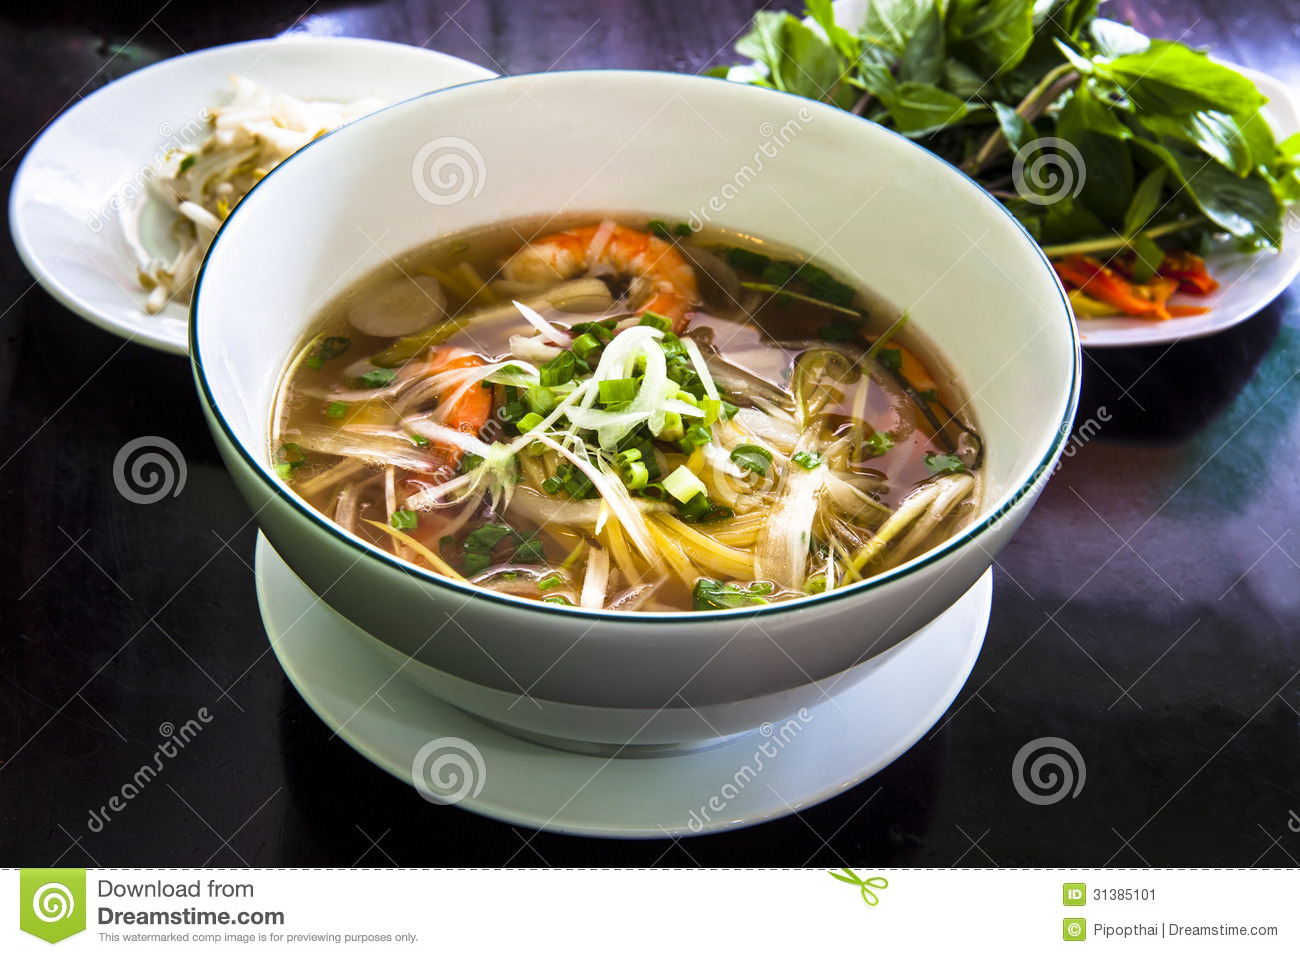 Pho Is A Vietnamese Noodle Soup Consisting Of Broth Linguine Shaped